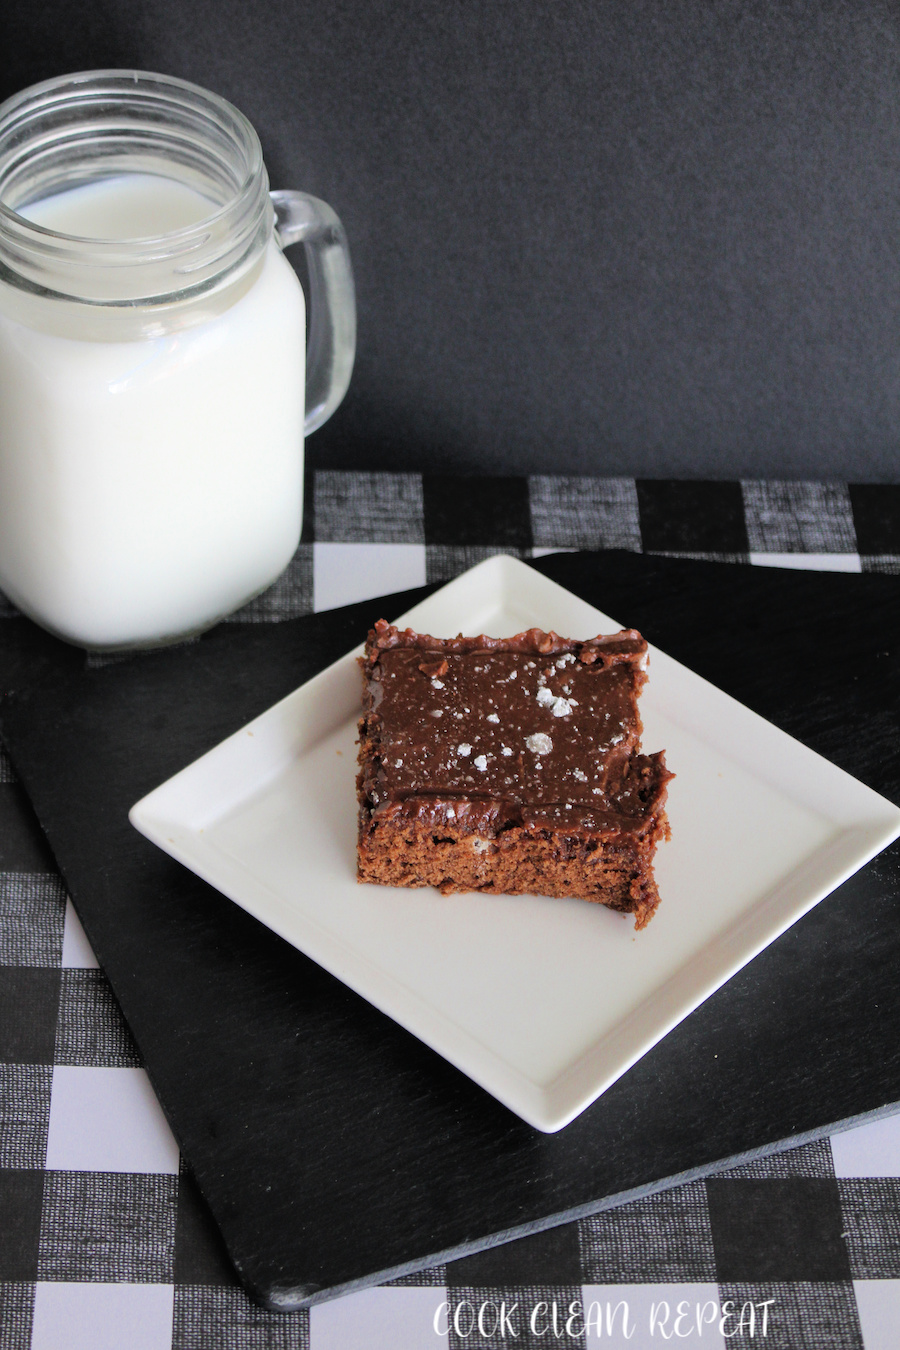 This featured image shows the delicious brownies from scratch ready to eat with a glass of milk on the side.